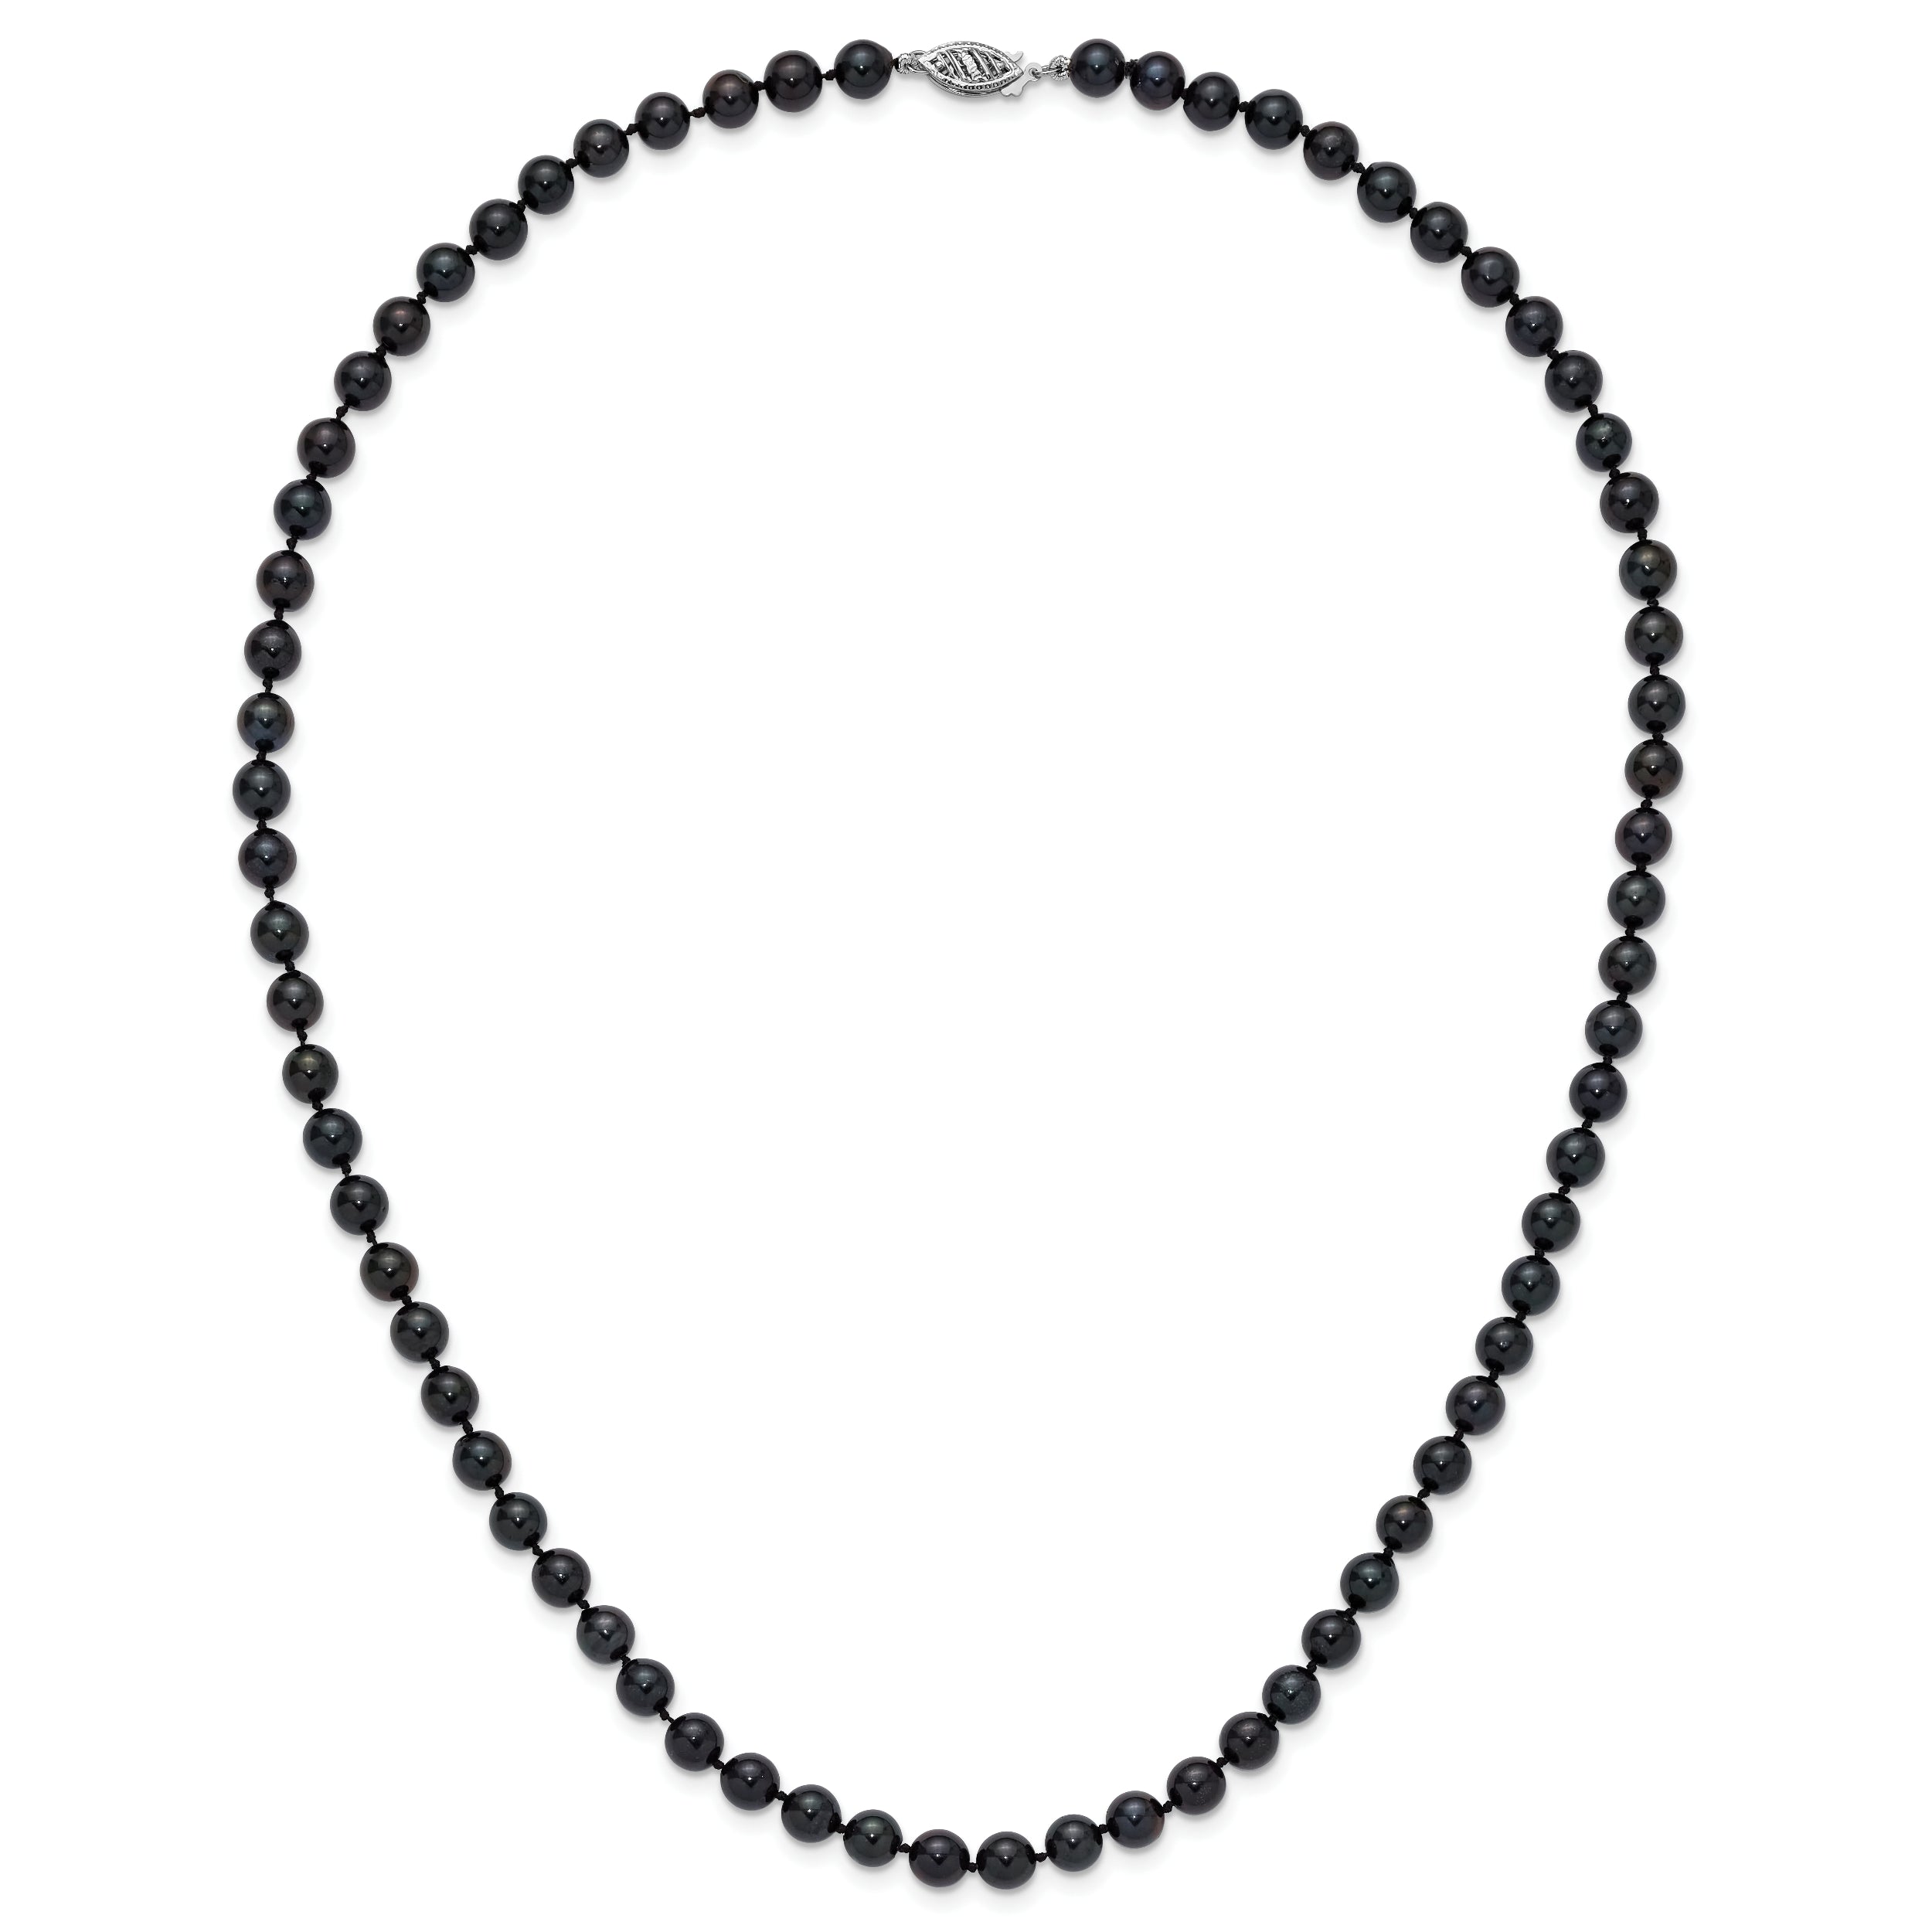 14k White Gold 6-7mm Round Black Saltwater Akoya Cultured Pearl Necklace